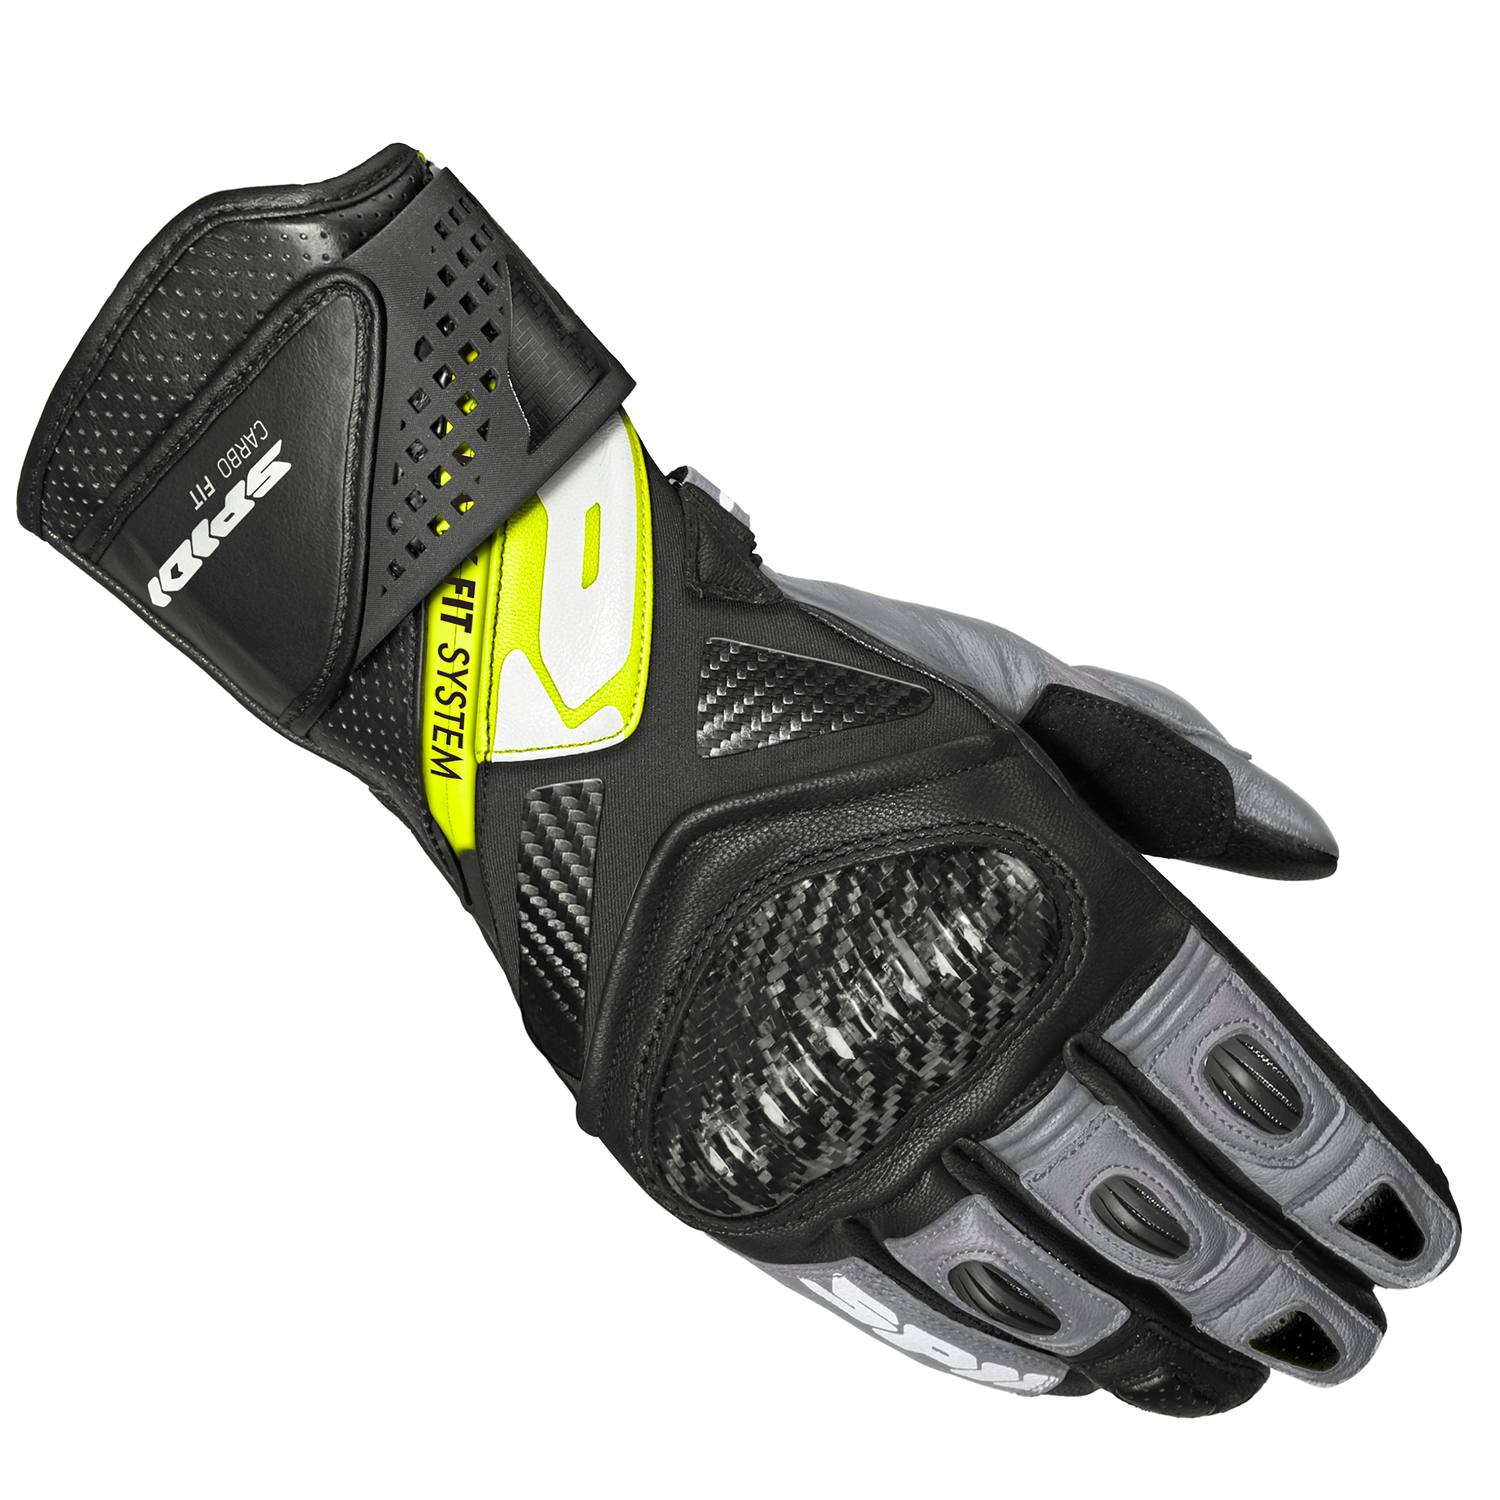 Image of Spidi Carbo Fit Gloves Black Fluorescente Yellow Size XL ID 8030161481563